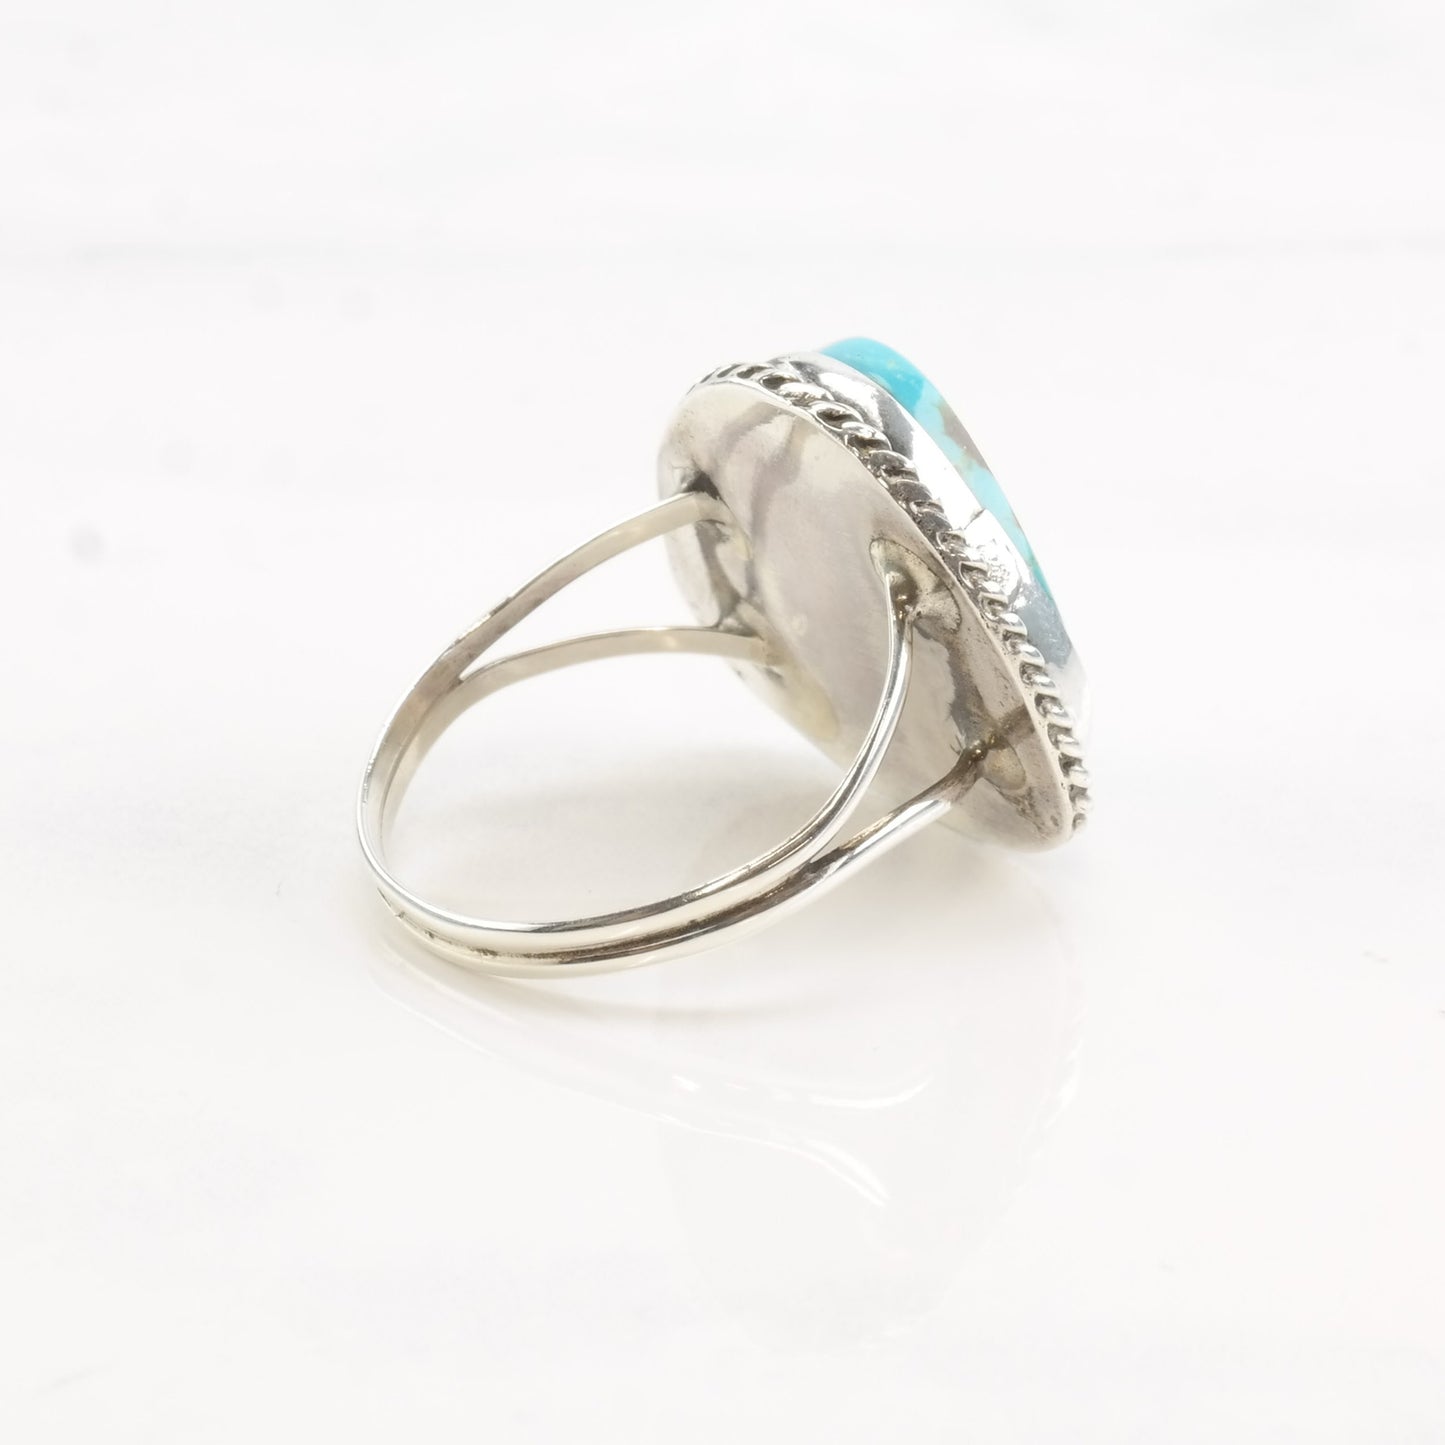 Vintage Southwest Silver Ring Turquoise Triangle Sterling Size 8